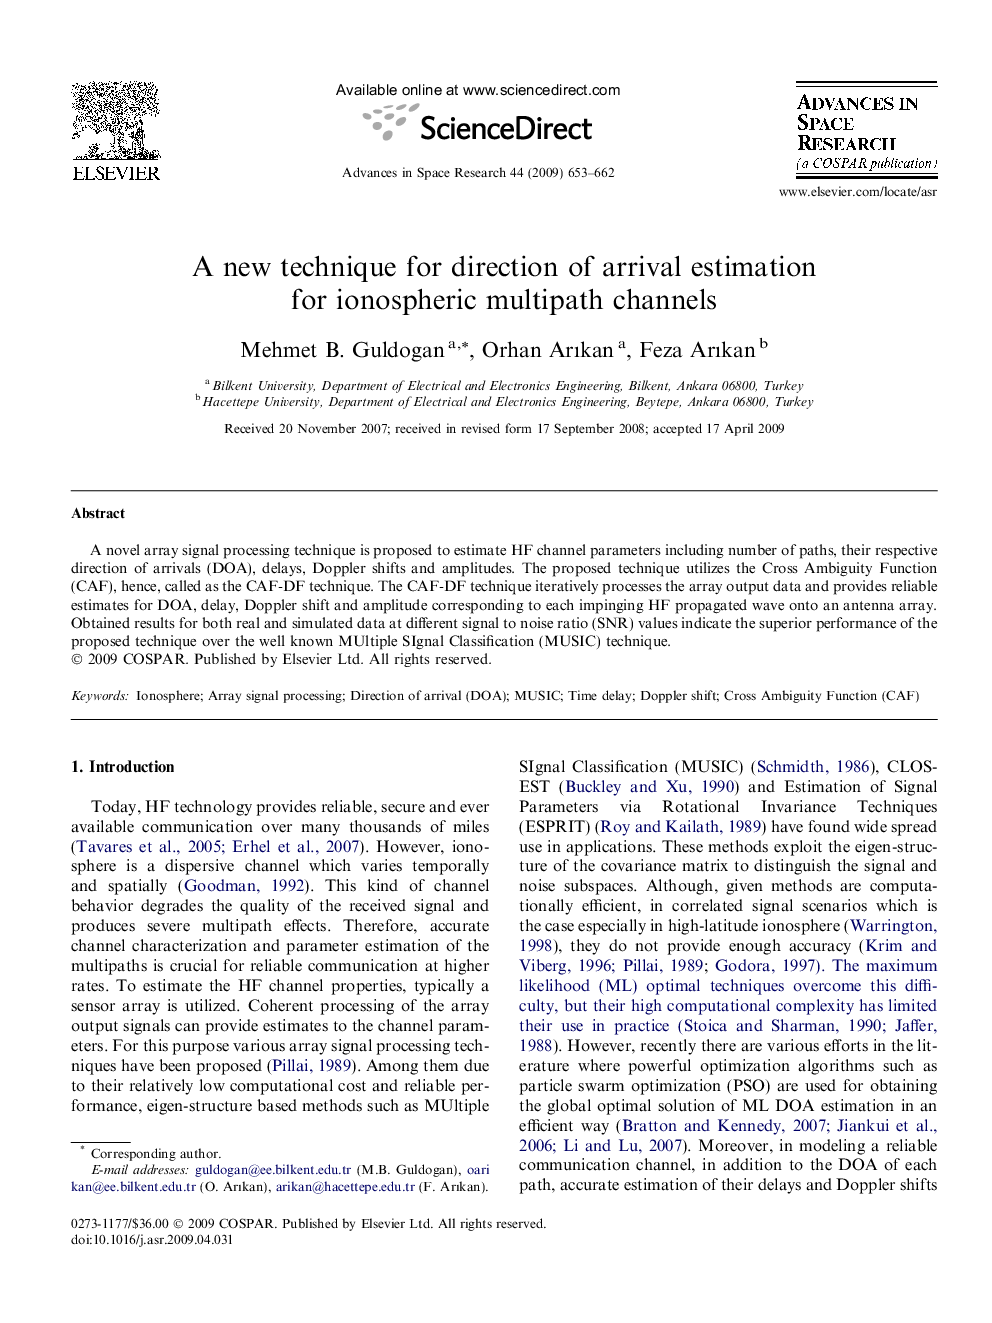 A new technique for direction of arrival estimation for ionospheric multipath channels